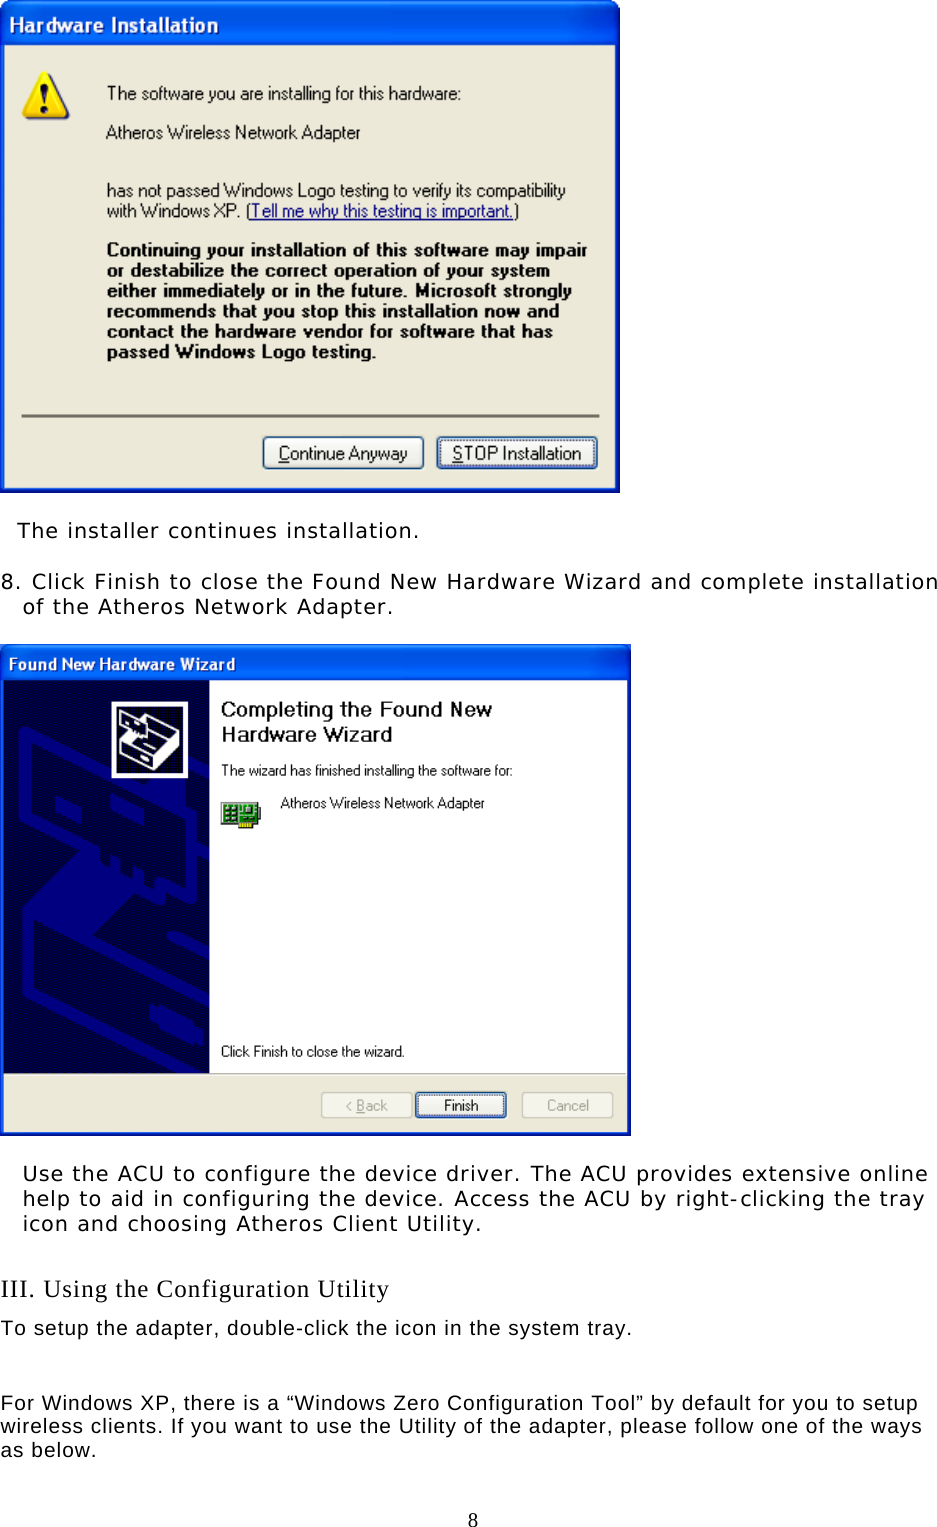  8     The installer continues installation.  8. Click Finish to close the Found New Hardware Wizard and complete installation of the Atheros Network Adapter.     Use the ACU to configure the device driver. The ACU provides extensive online help to aid in configuring the device. Access the ACU by right-clicking the tray icon and choosing Atheros Client Utility.   III. Using the Configuration Utility To setup the adapter, double-click the icon in the system tray.   For Windows XP, there is a “Windows Zero Configuration Tool” by default for you to setup wireless clients. If you want to use the Utility of the adapter, please follow one of the ways as below.  